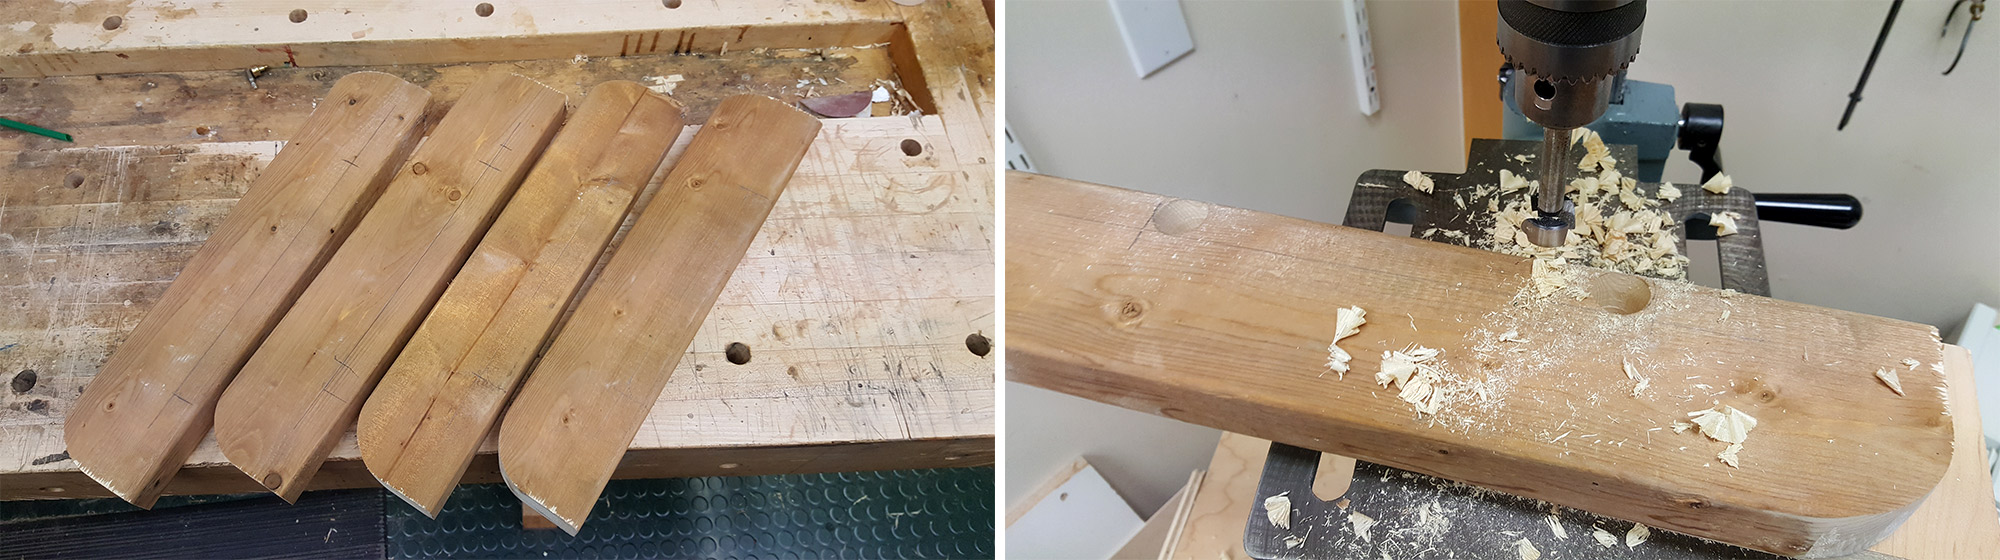 Left: Feet after radius had been cut. Right: Drilling two 1” holes.